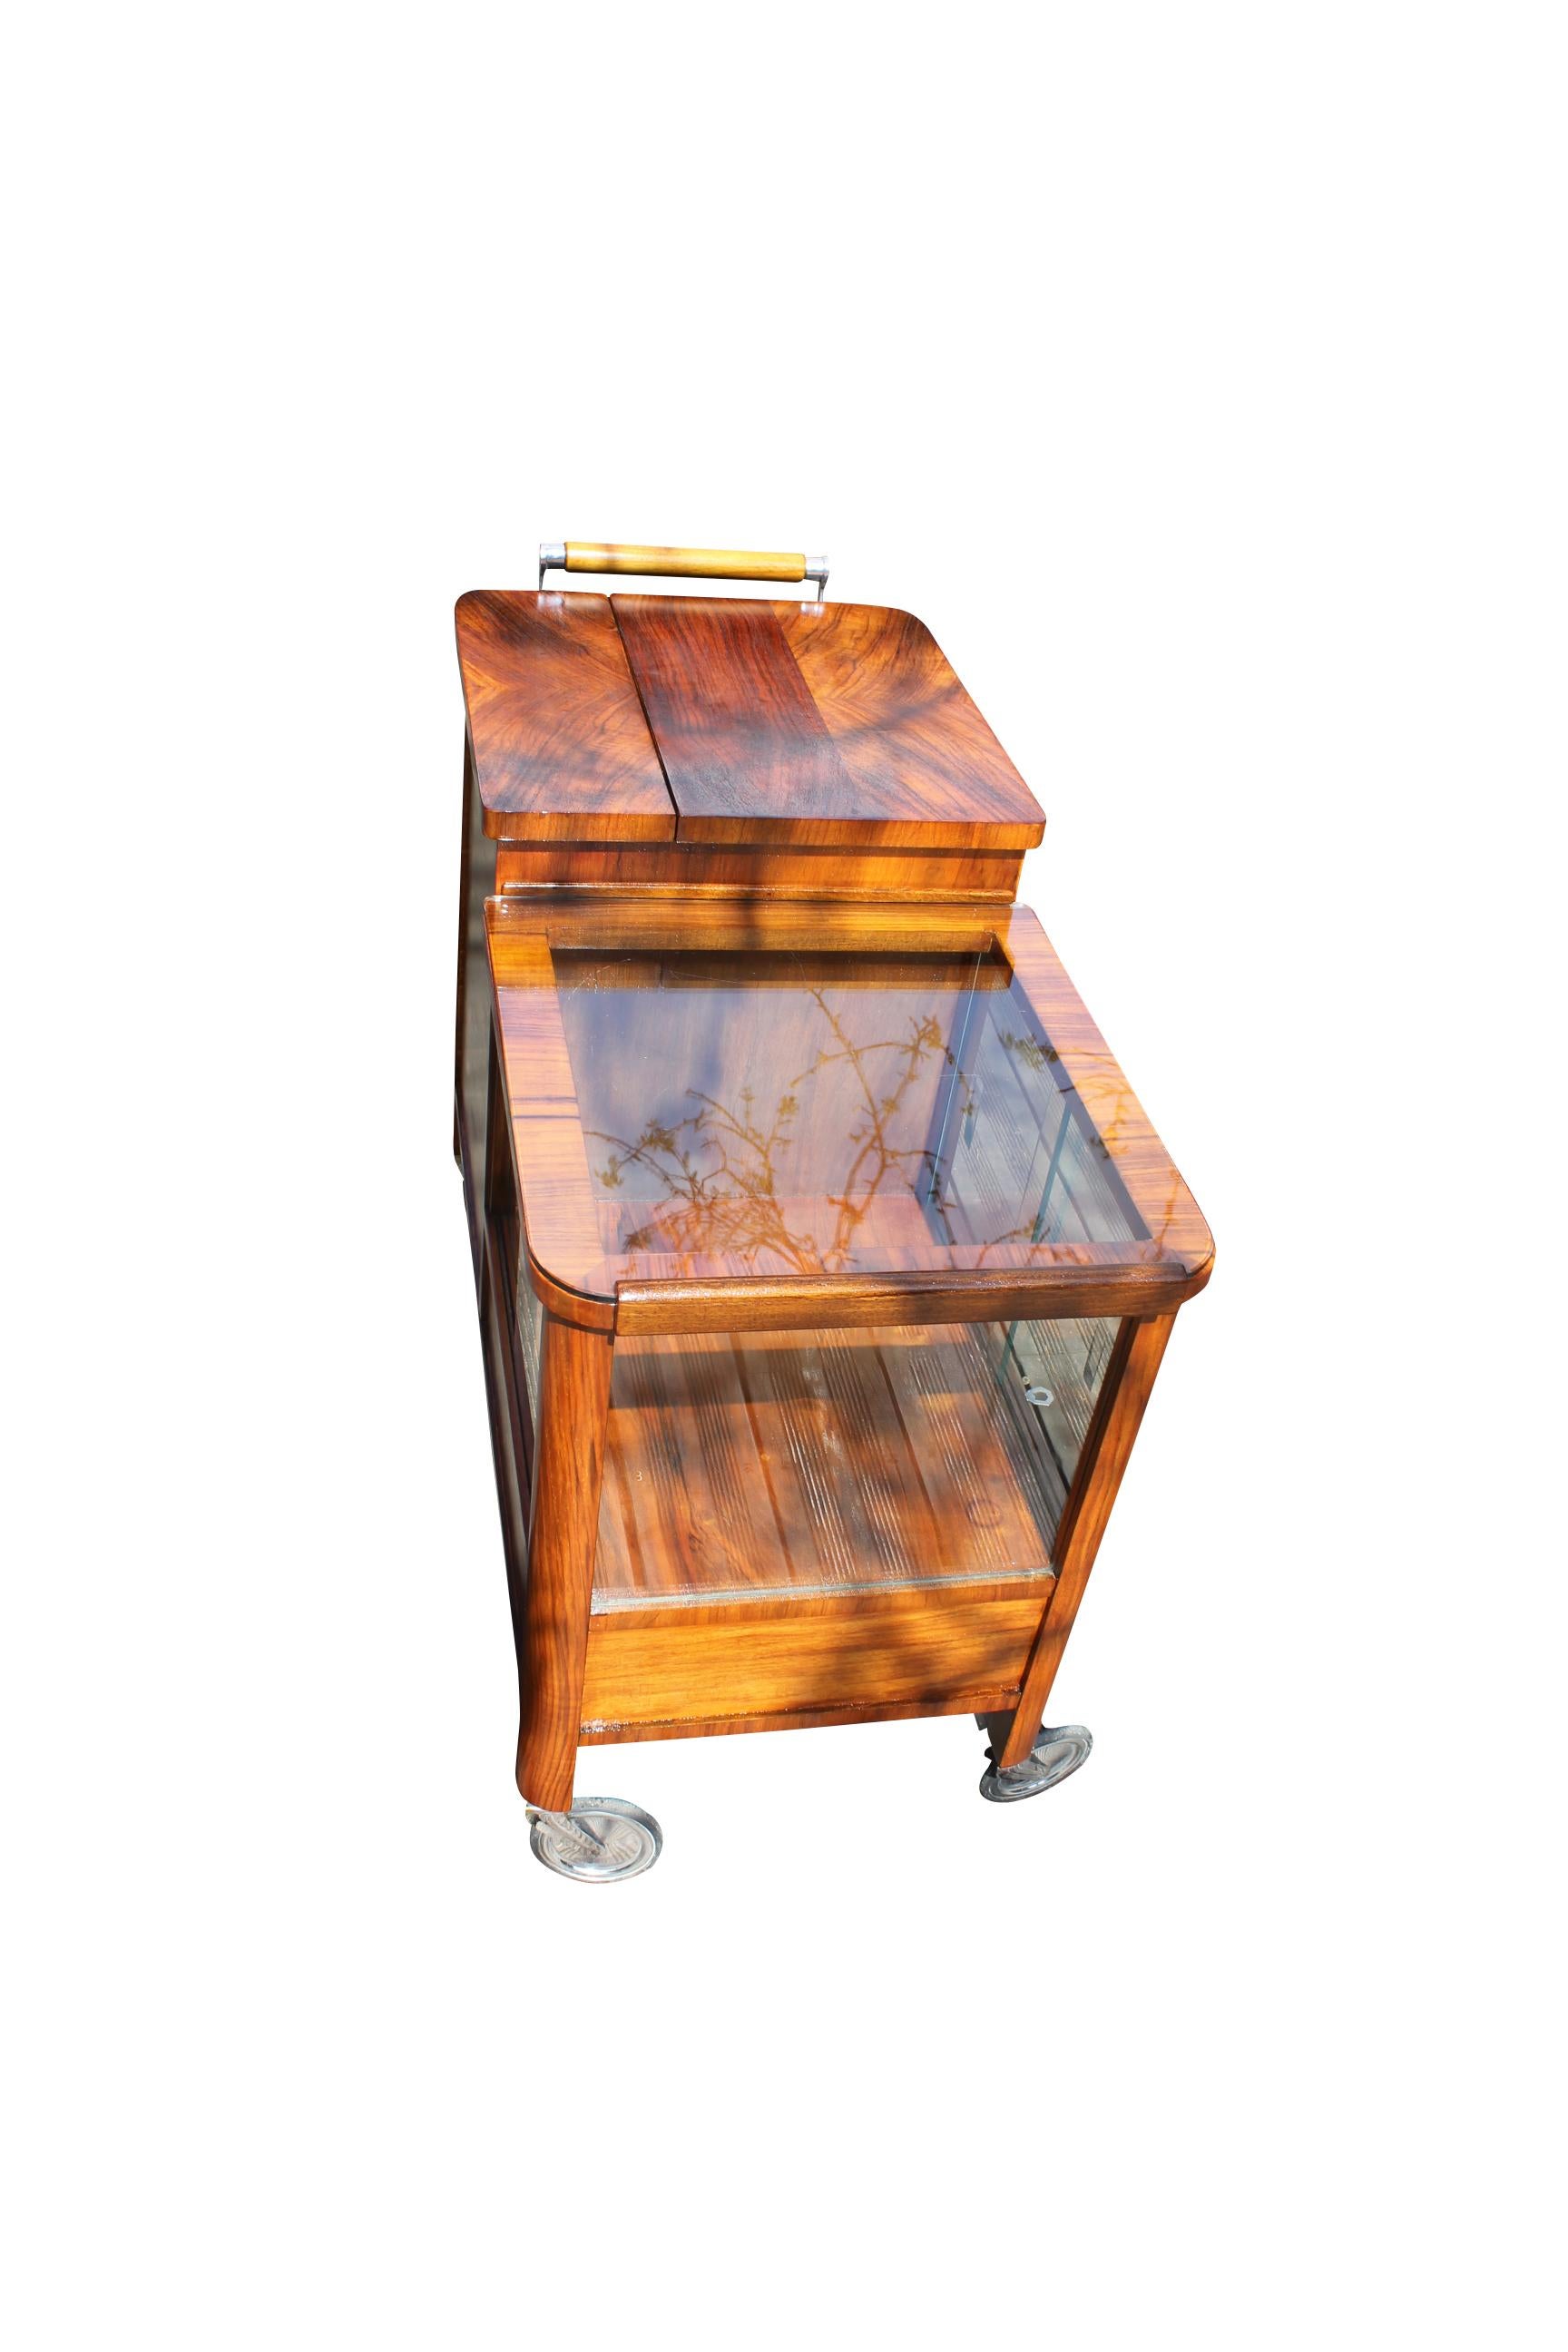 An Art Deco bar on wheels. The piece of furniture consists of a showcase, perfect for exhibiting your belongings, a lockable drawer and a hinged compartment for cooling the drinks. The wood has been polished by hand to high gloss and shines in a